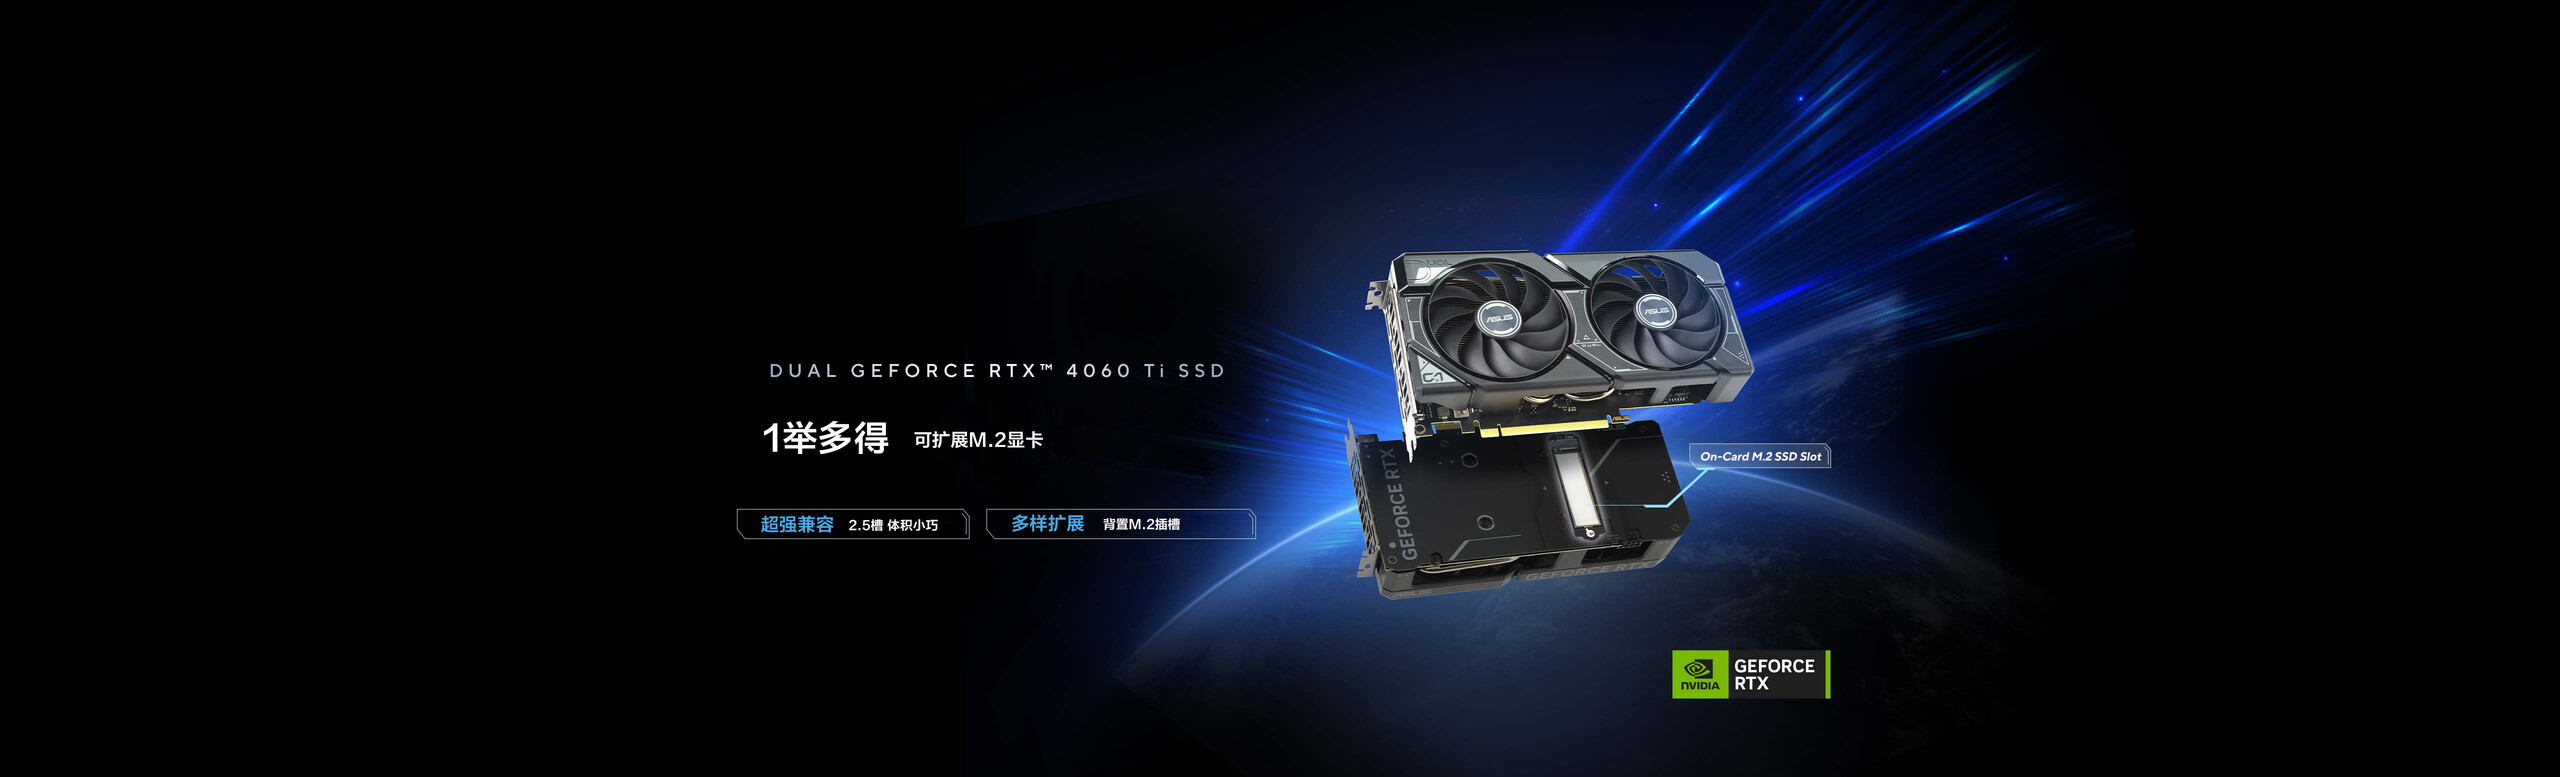 ASUS Dual RTX 4060 Ti SSD with speed feeling and space themed background